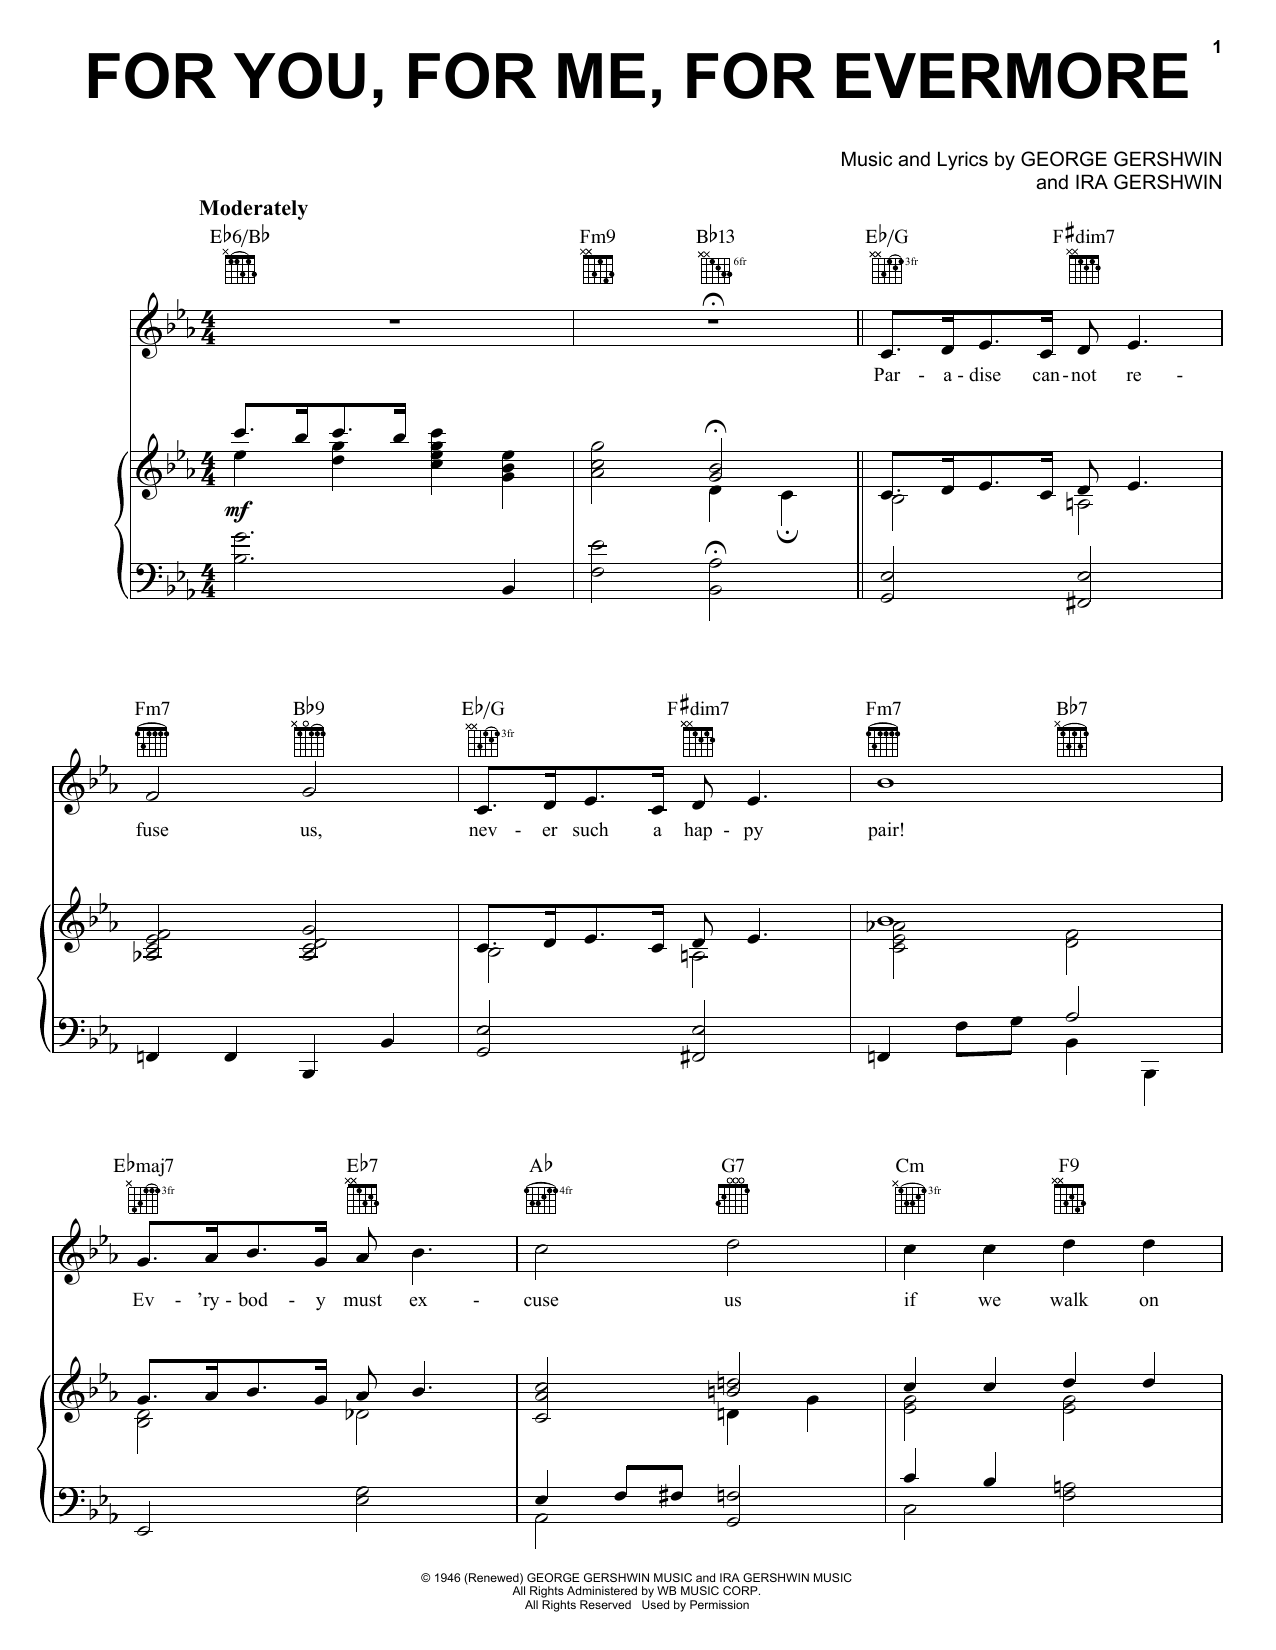 Download George Gershwin For You, For Me, For Evermore Sheet Music